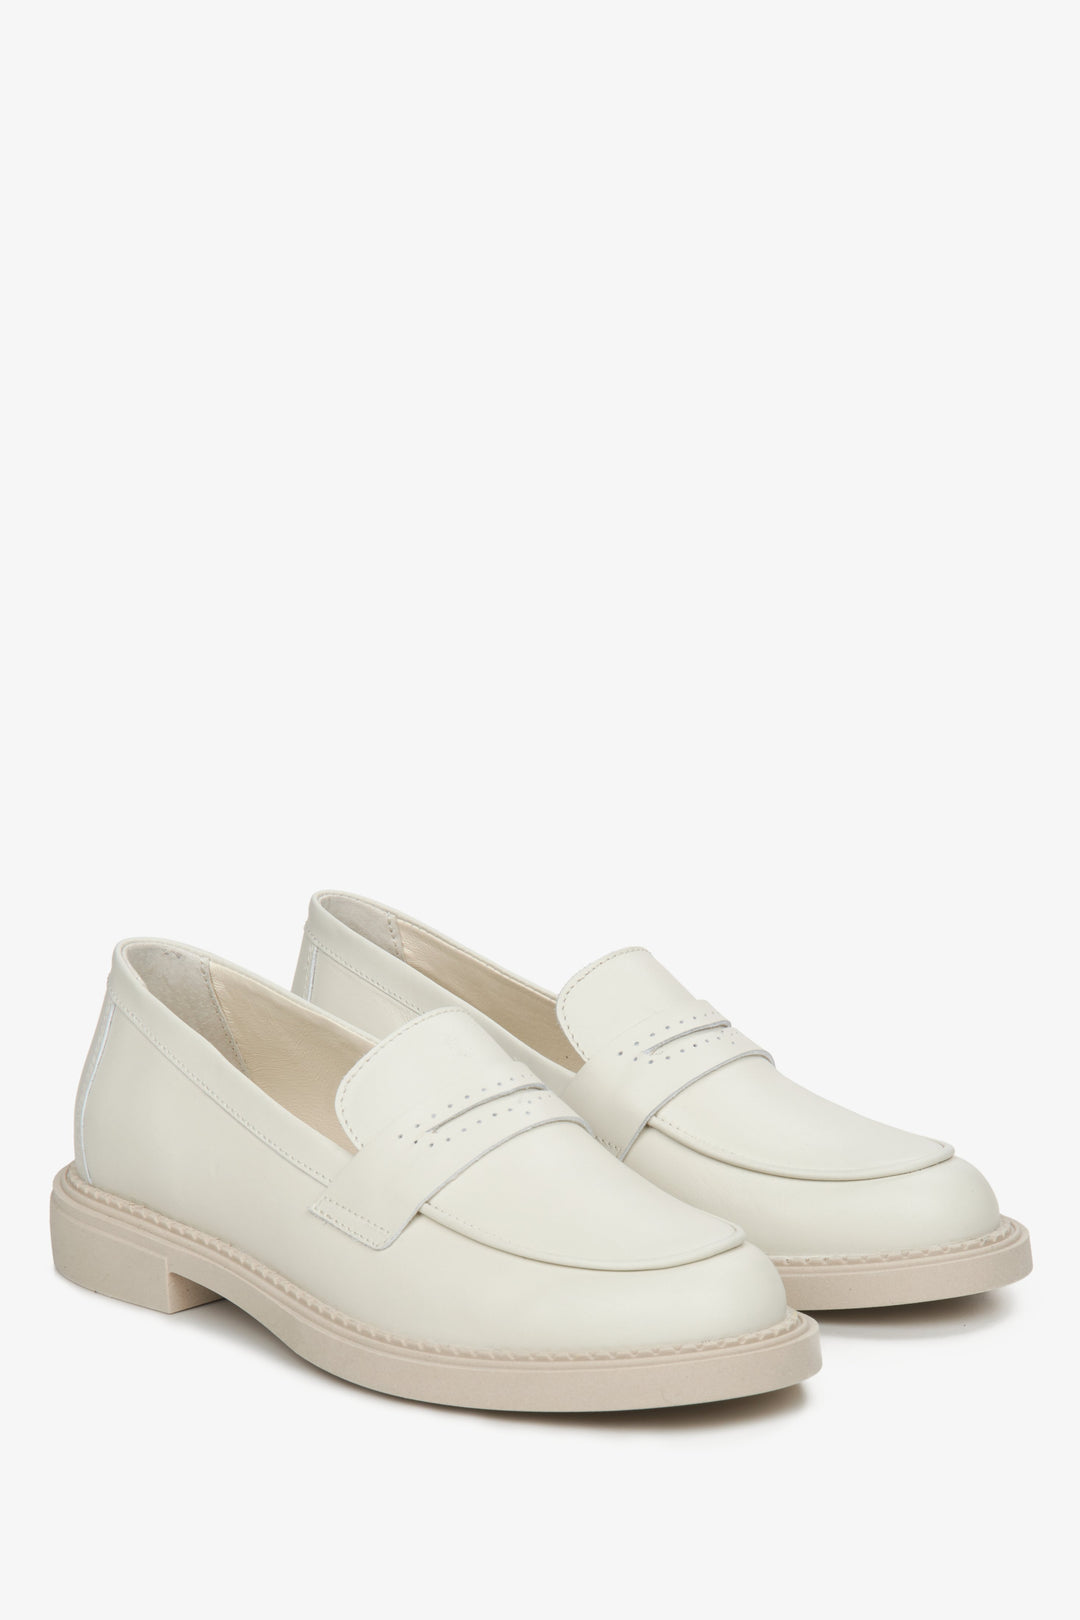 Women's beige leather loafers for spring Estro.